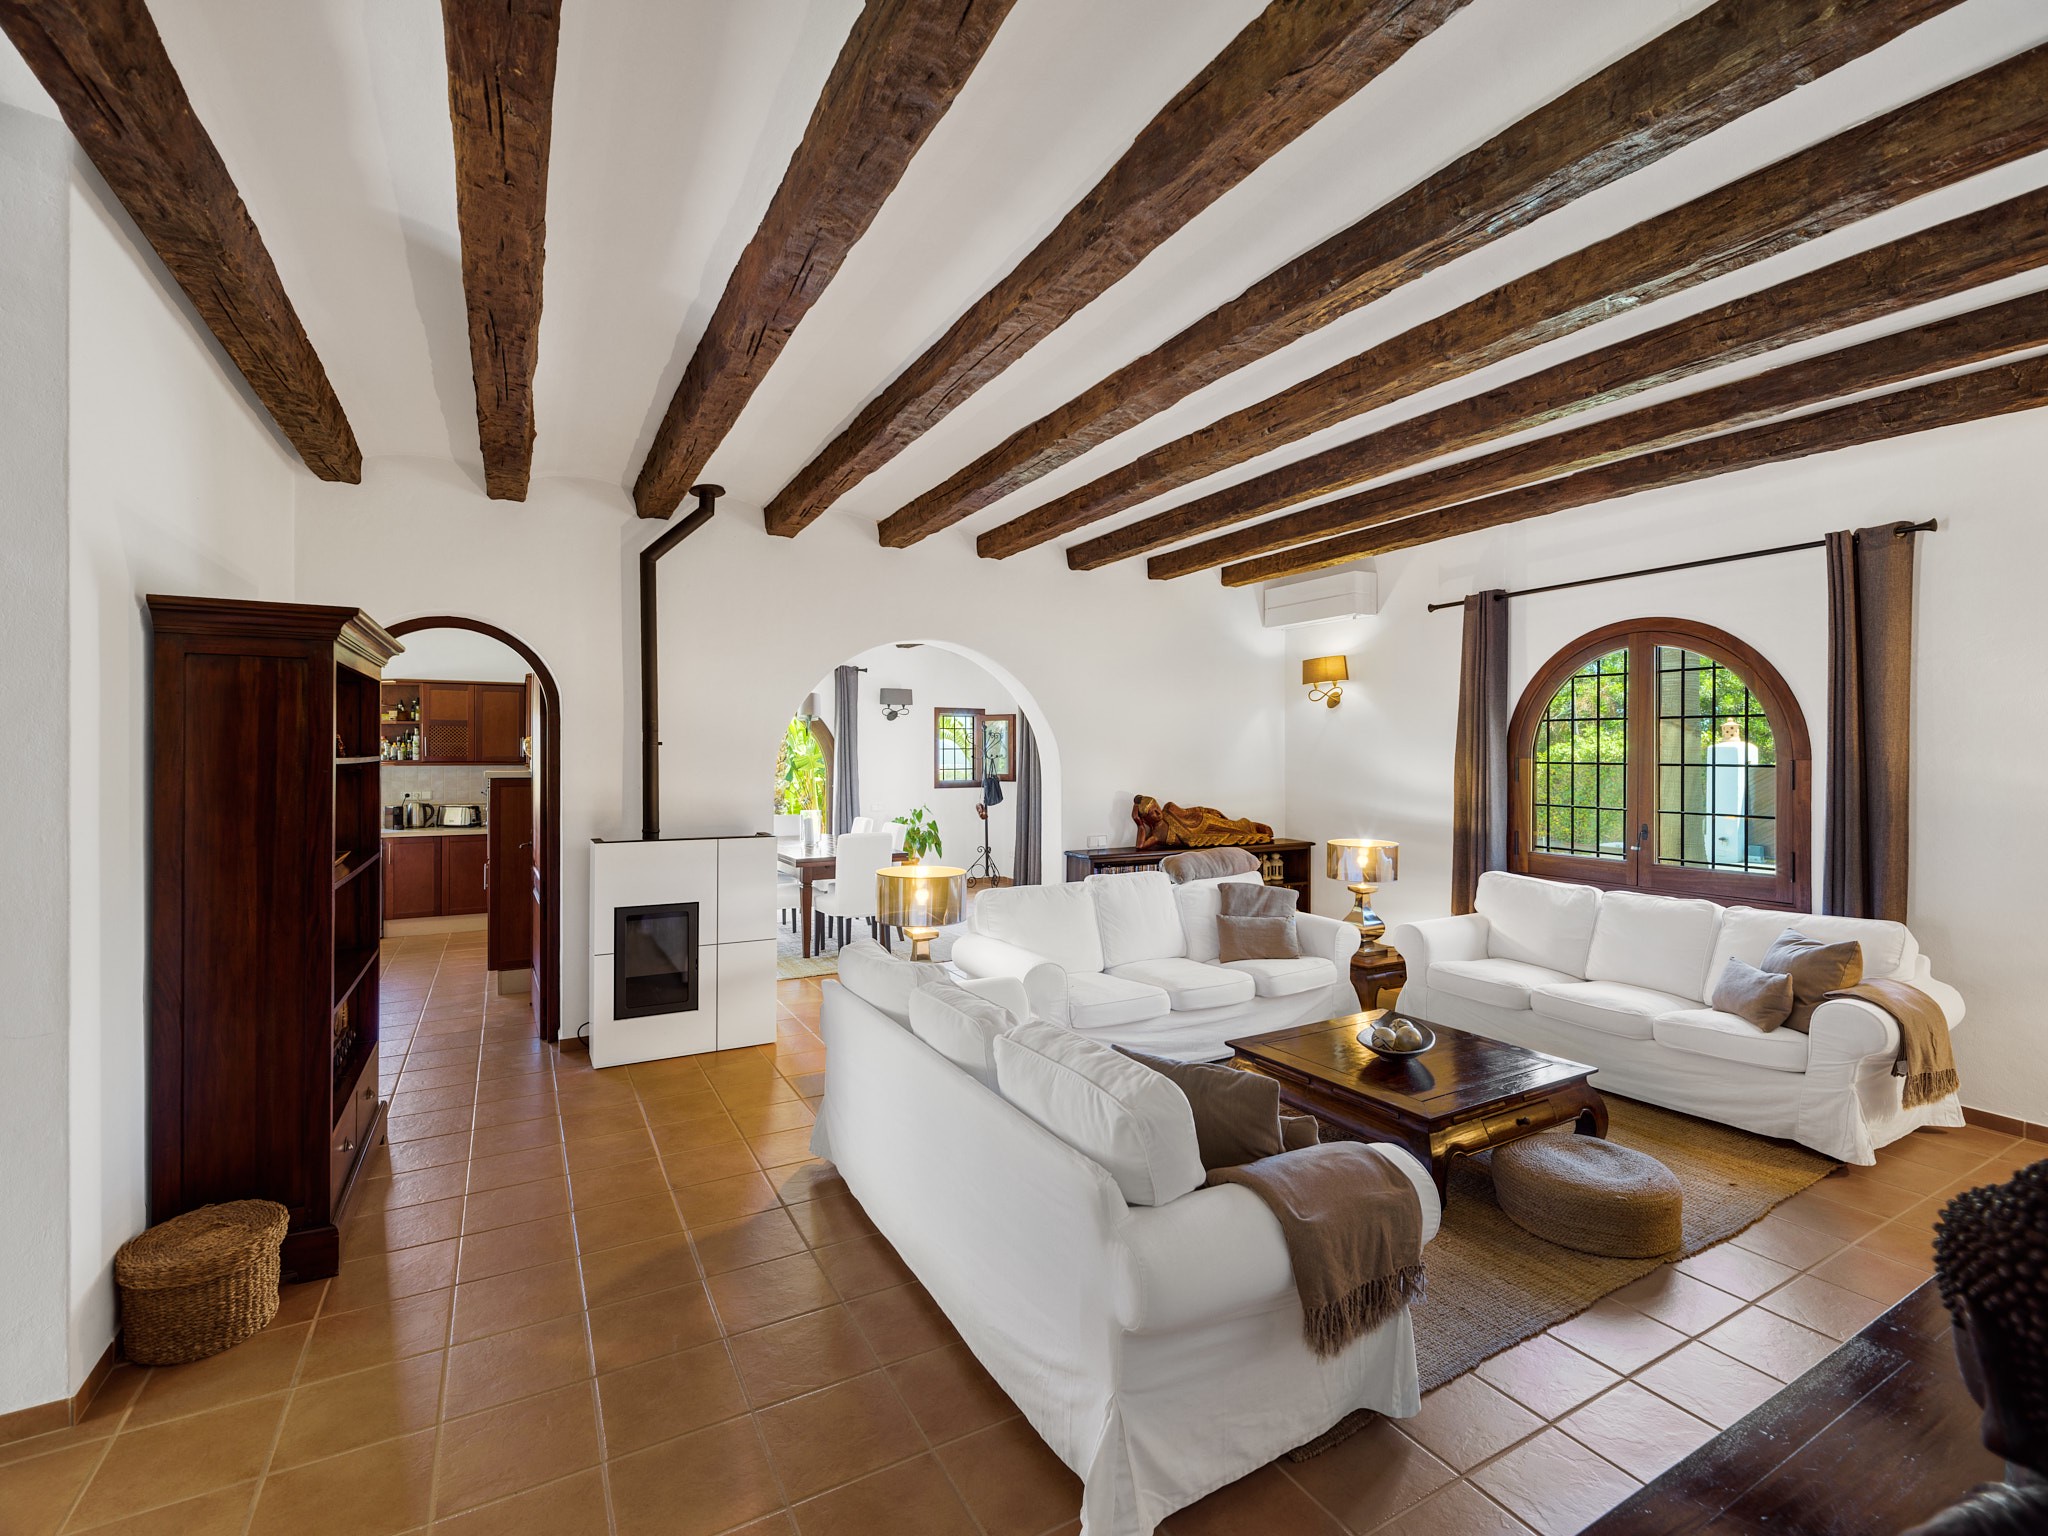 Perfectly maintained finca-style villa in central location - 5